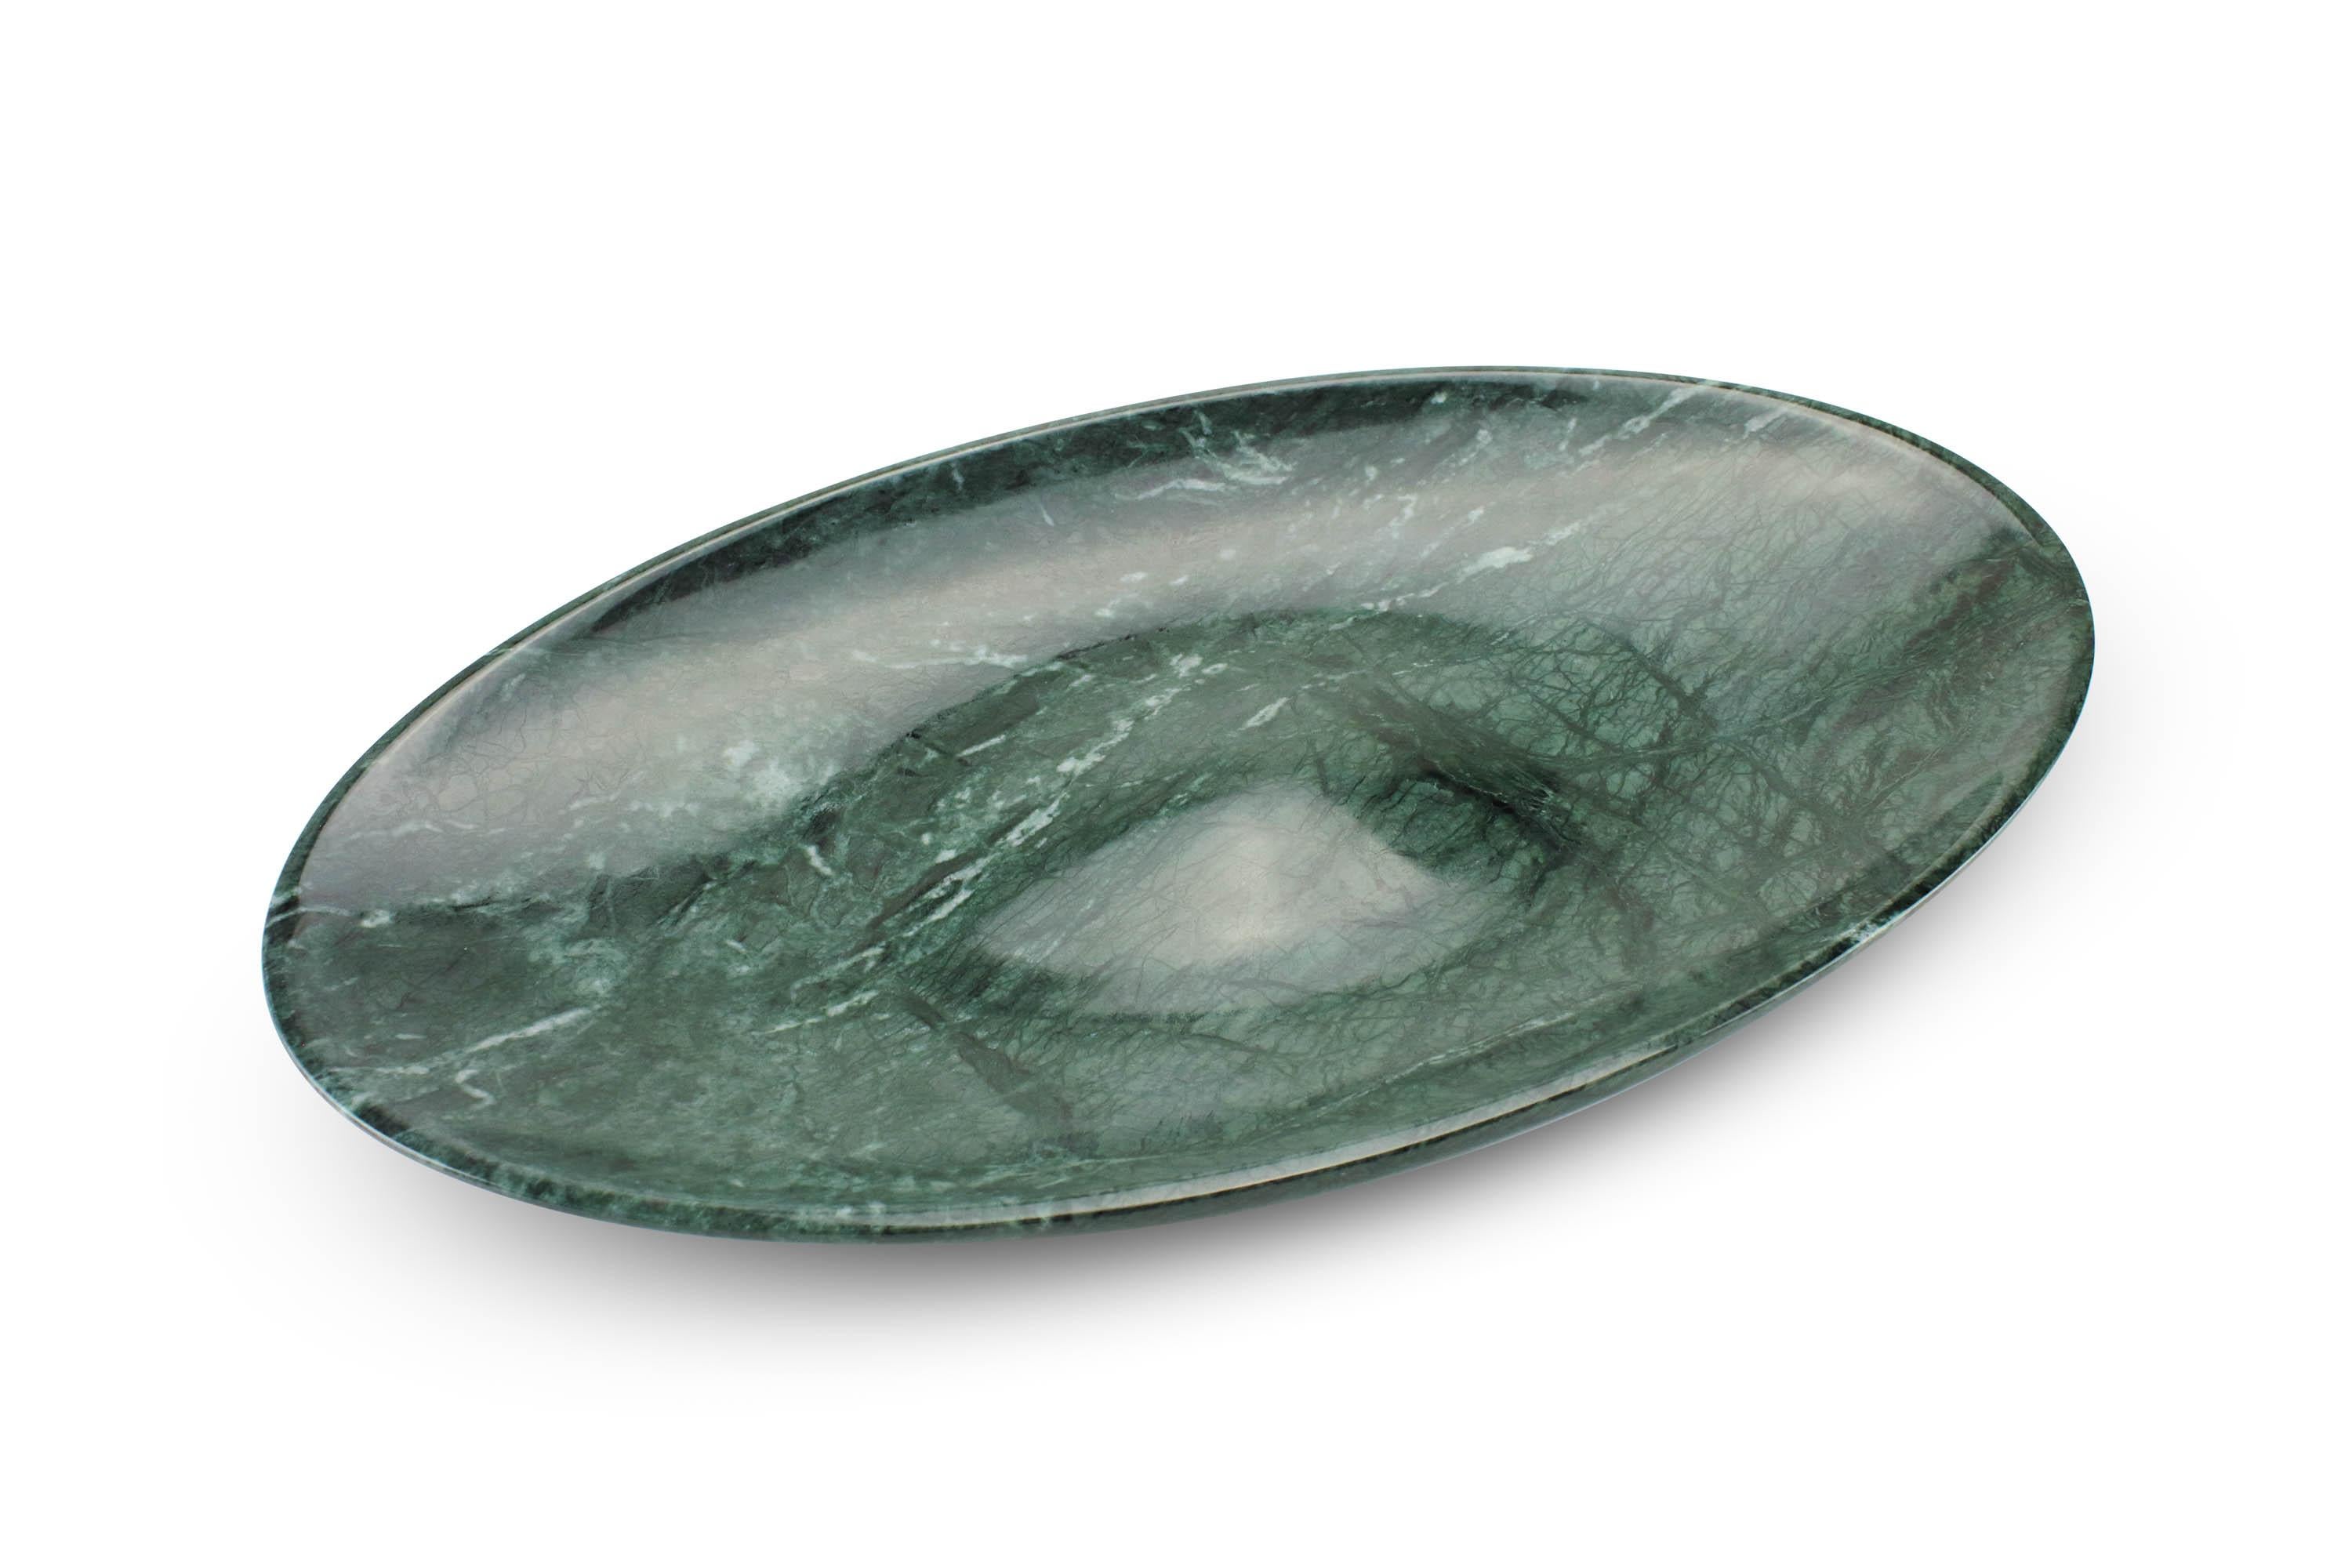 Important sculptural bowl carved by hand from a solid block of Imperial Green. 

Bowl dimensions: L 59 x W 34 x H 6 cm. Available in different marbles, onyx and quartzite. 

Limited Edition of 50.

Each bowl is hand signed and numbered by the